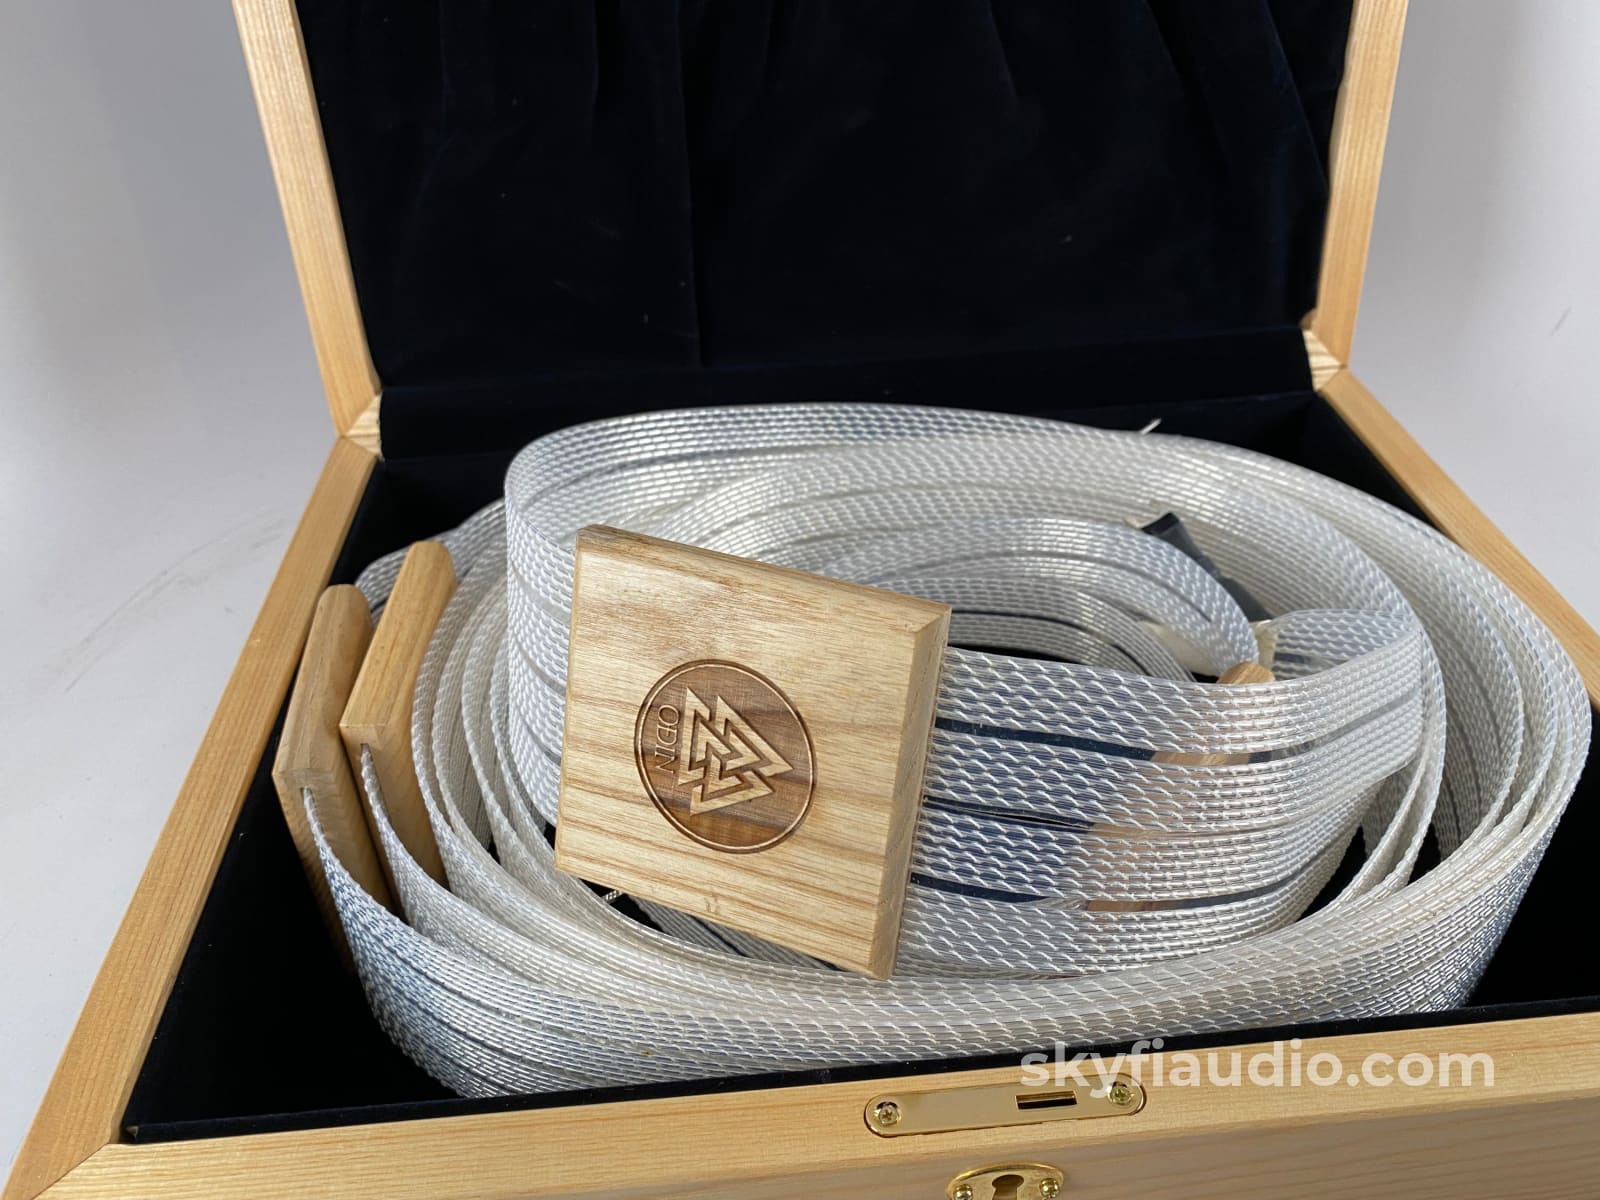 Nordost ODIN Supreme Reference Pure Silver Speaker Cables - Like New I